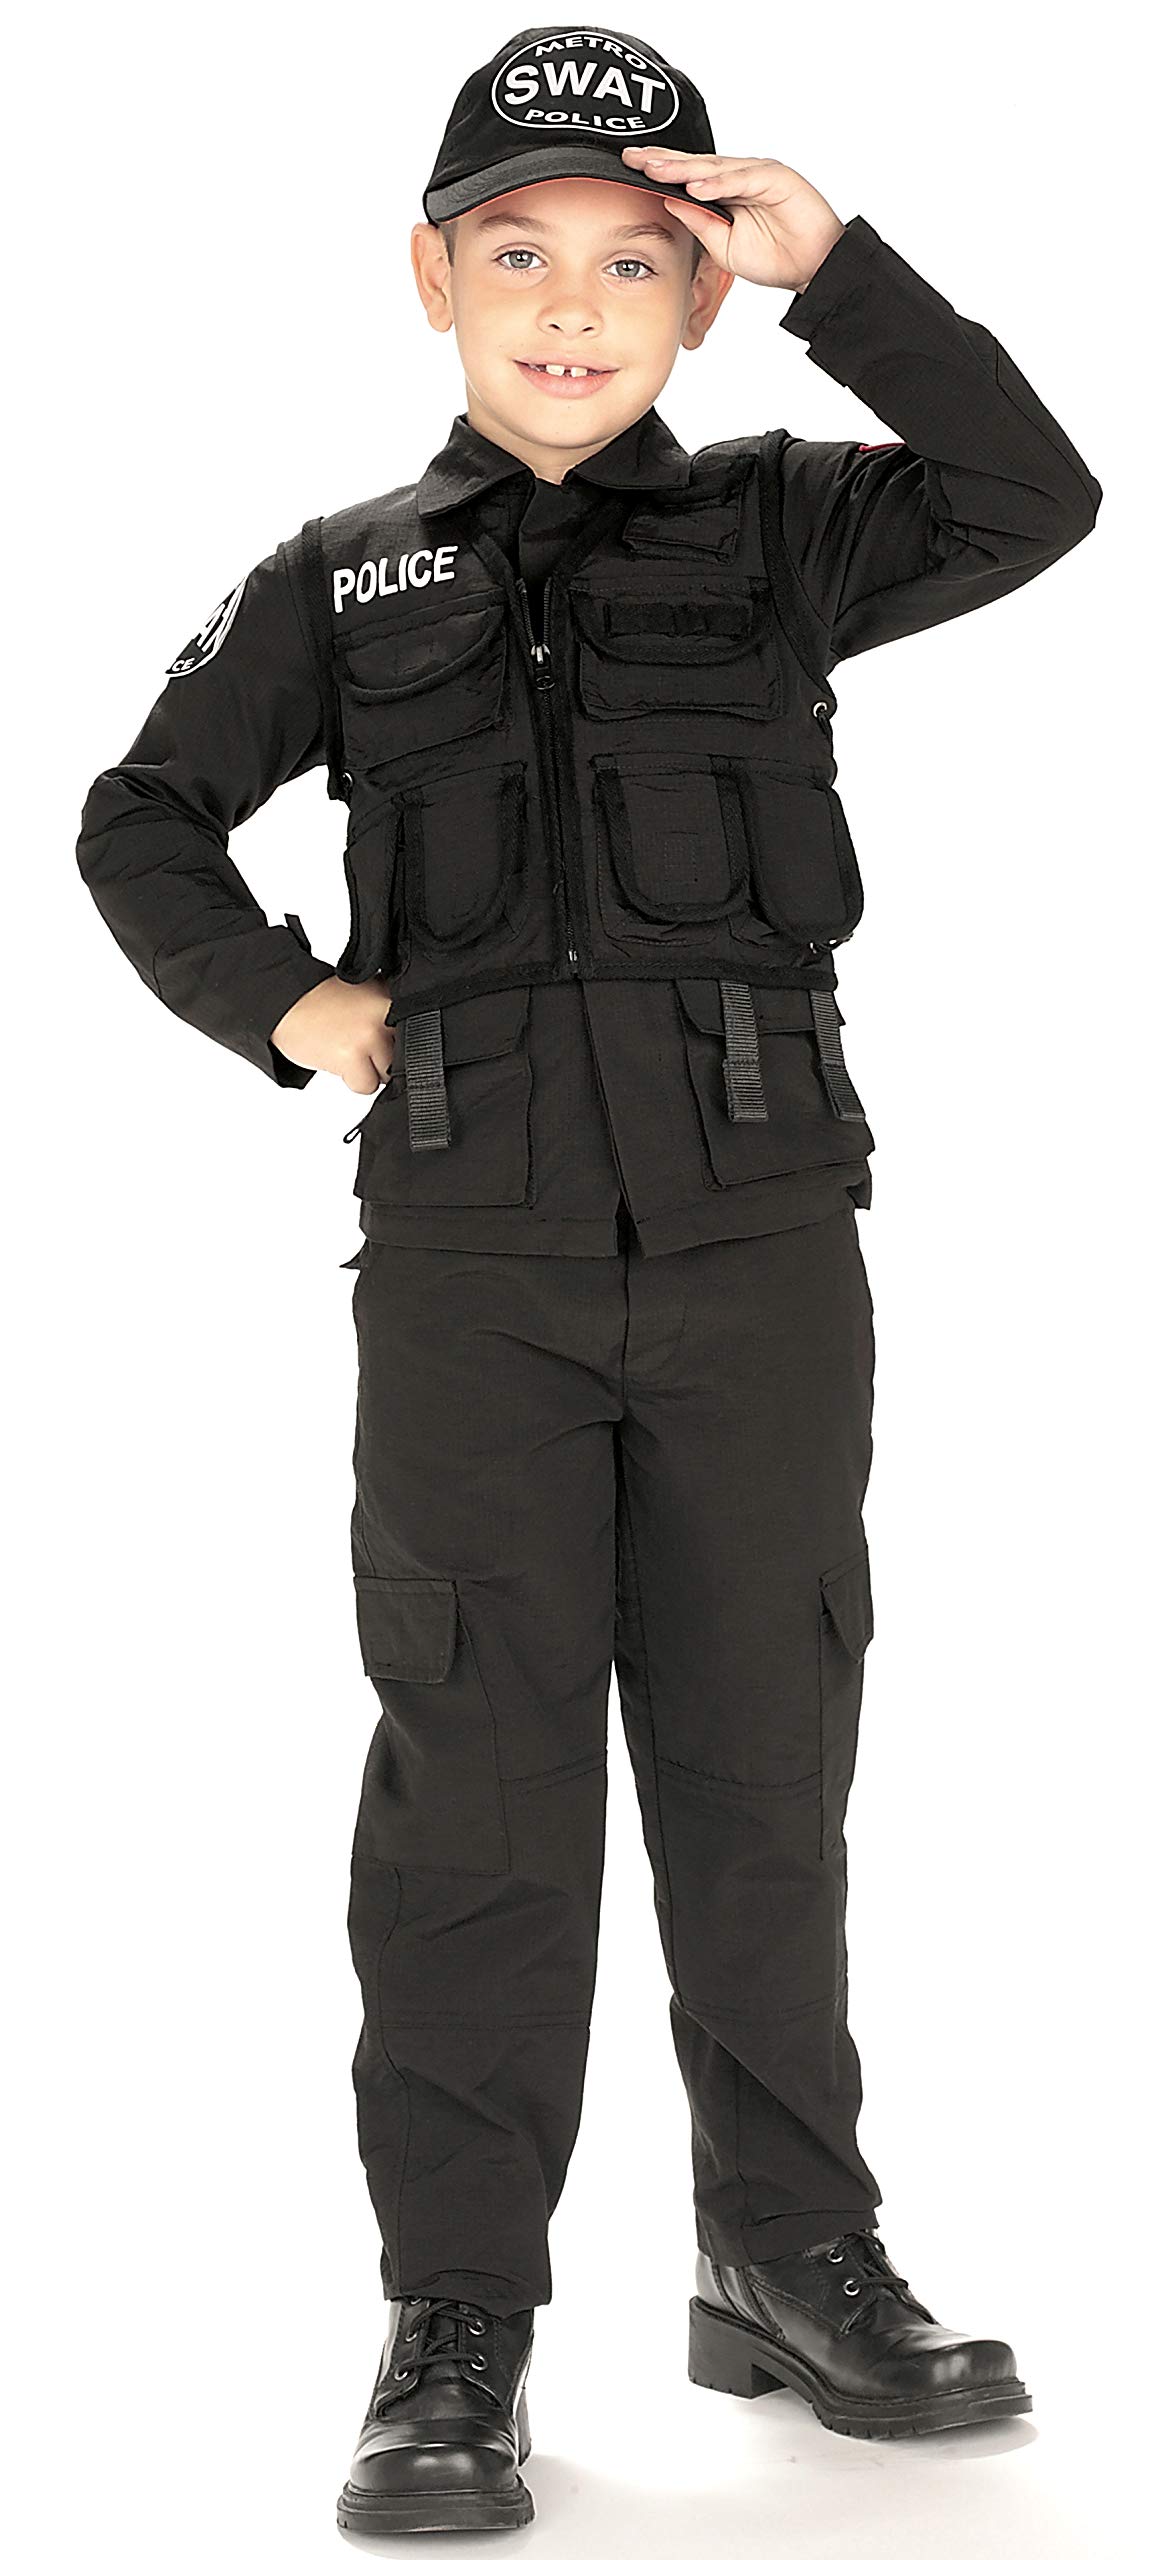 Young Heroes Child's SWAT Police Costume, Medium